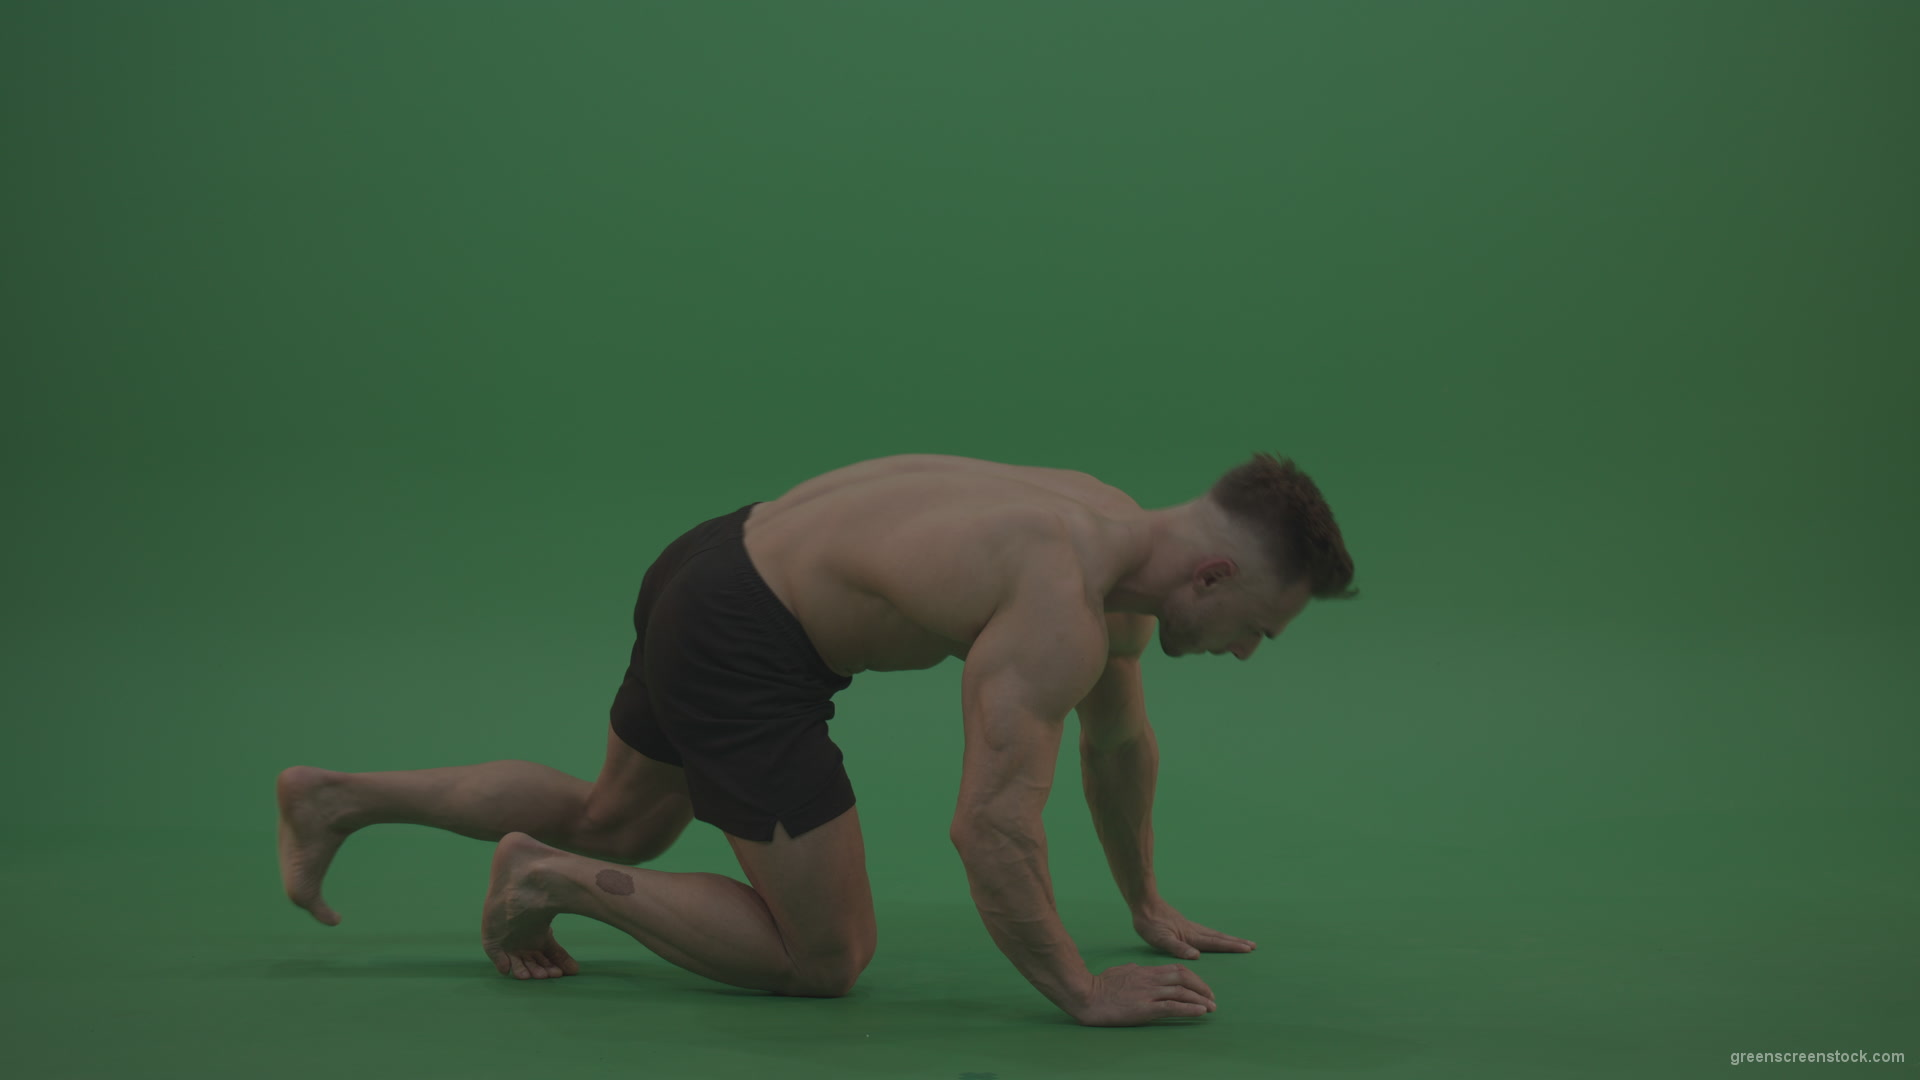 Young_Bodybuilder_Starts_Working_Out_From_Crouching_Terminator_Position_Does_Pull_Ups_Turns_Back_To_The_Start_Position_On_Green_Screen_Wall_Background_002 Green Screen Stock